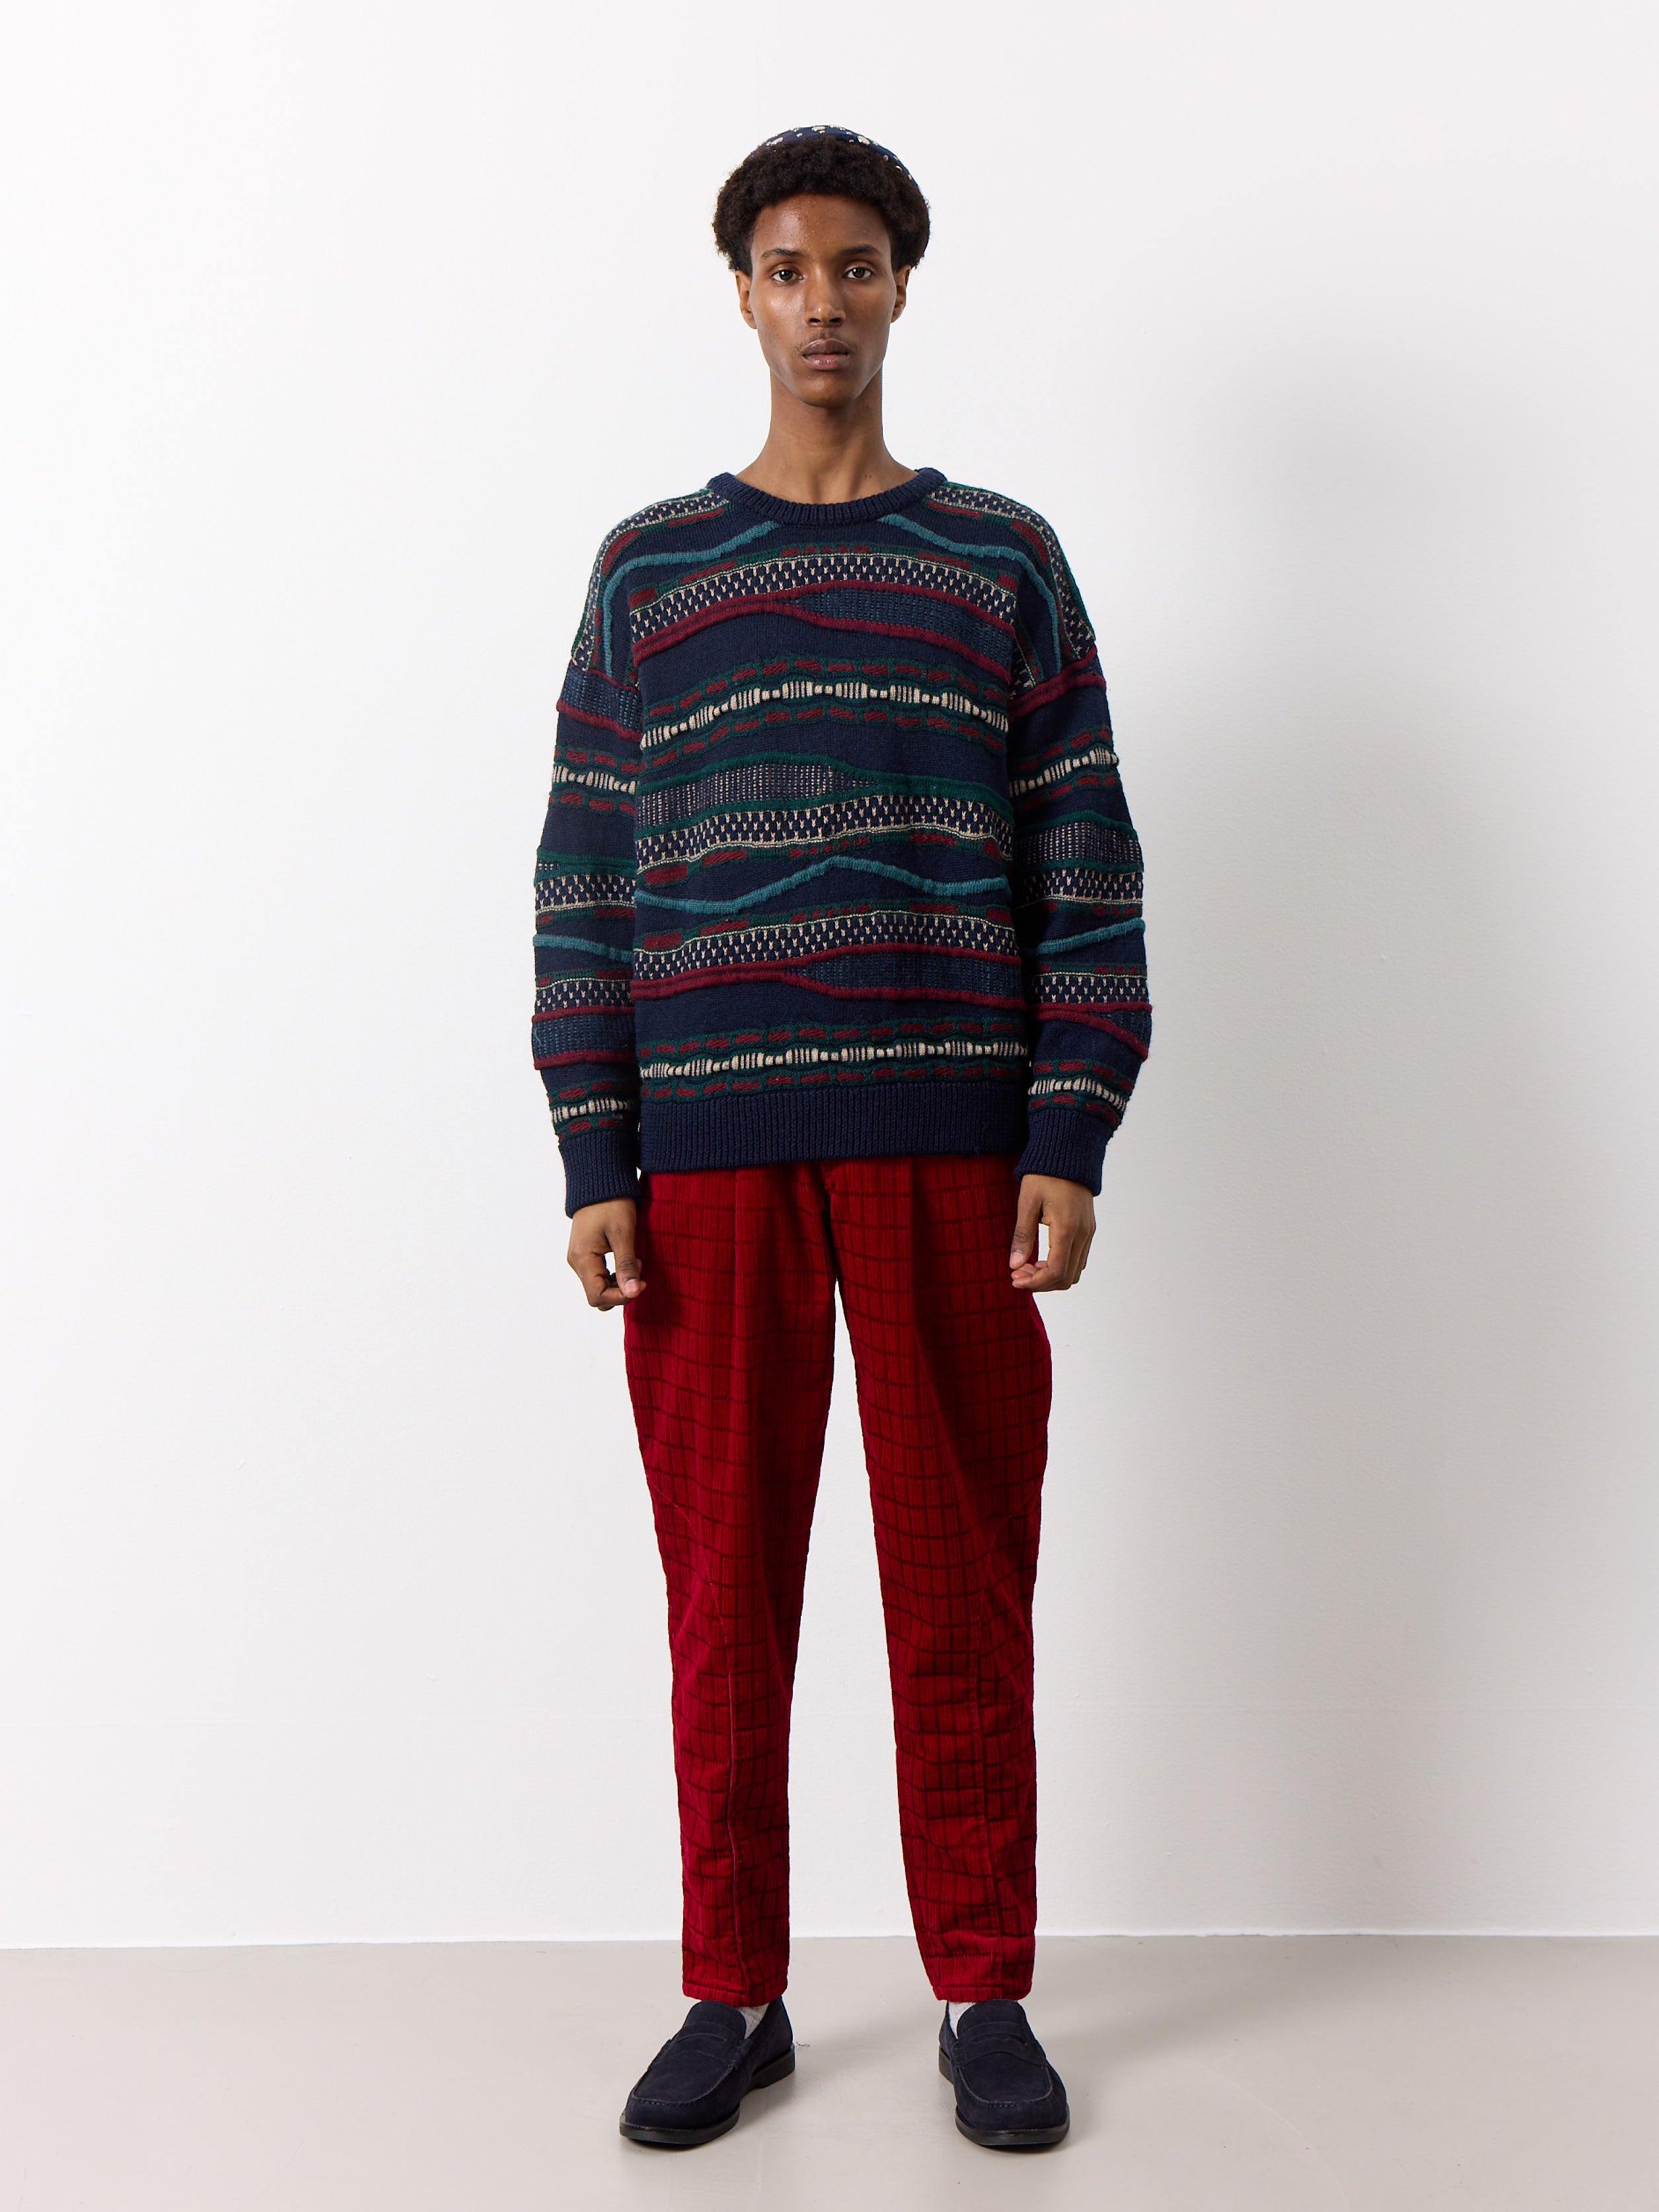 Expertly crafted knit sweater featuring a timeless Coogi-inspired design. The thick, three-dimensional knit adds a touch of boldness to this minimalist piece.